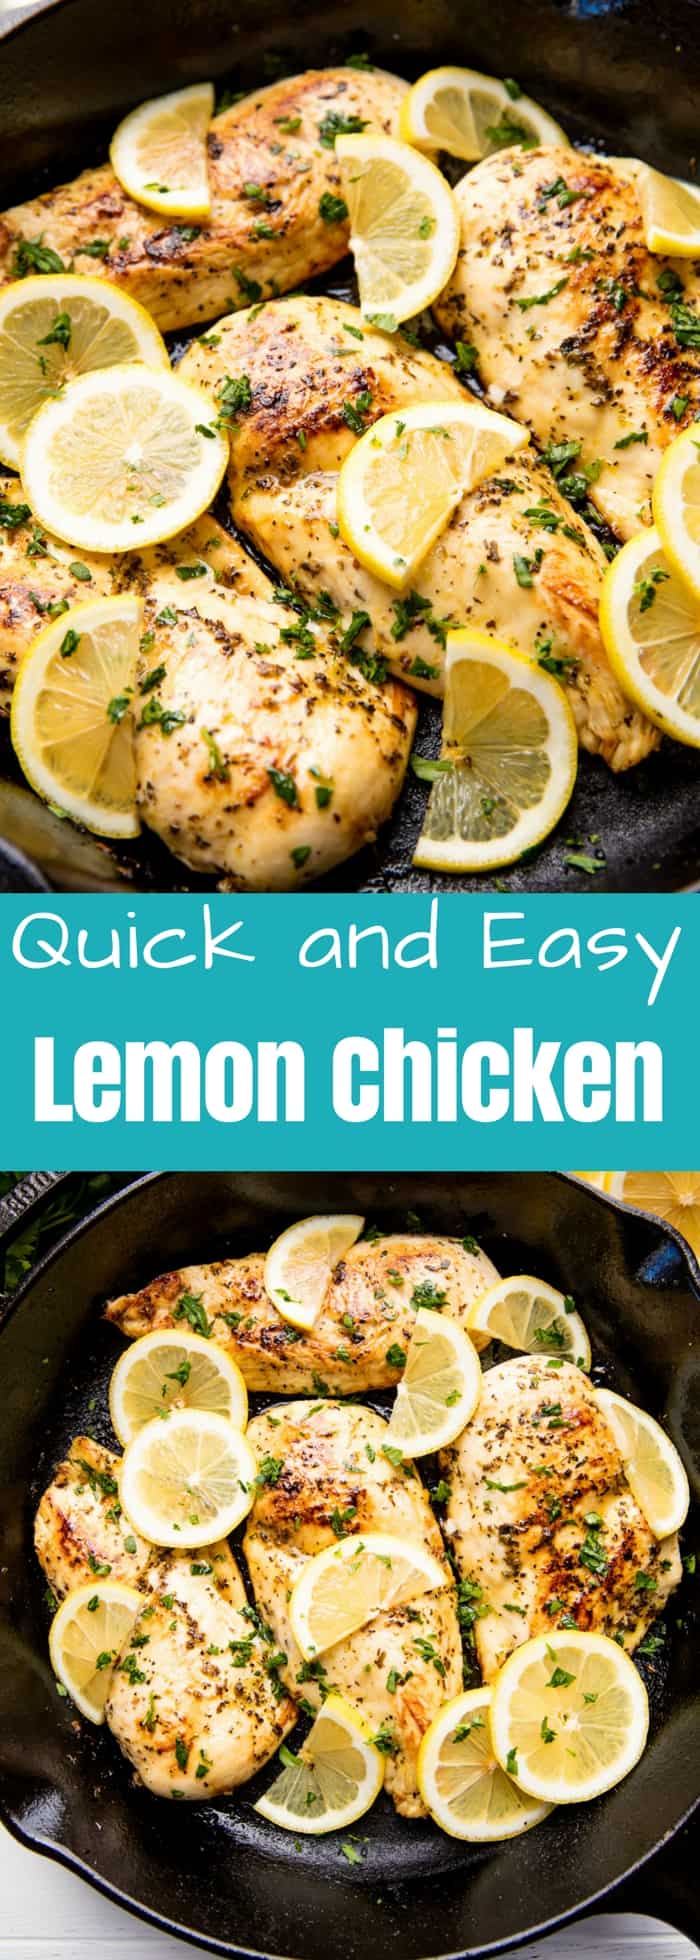 Quick and Easy Lemon Chicken - Cafe Delites